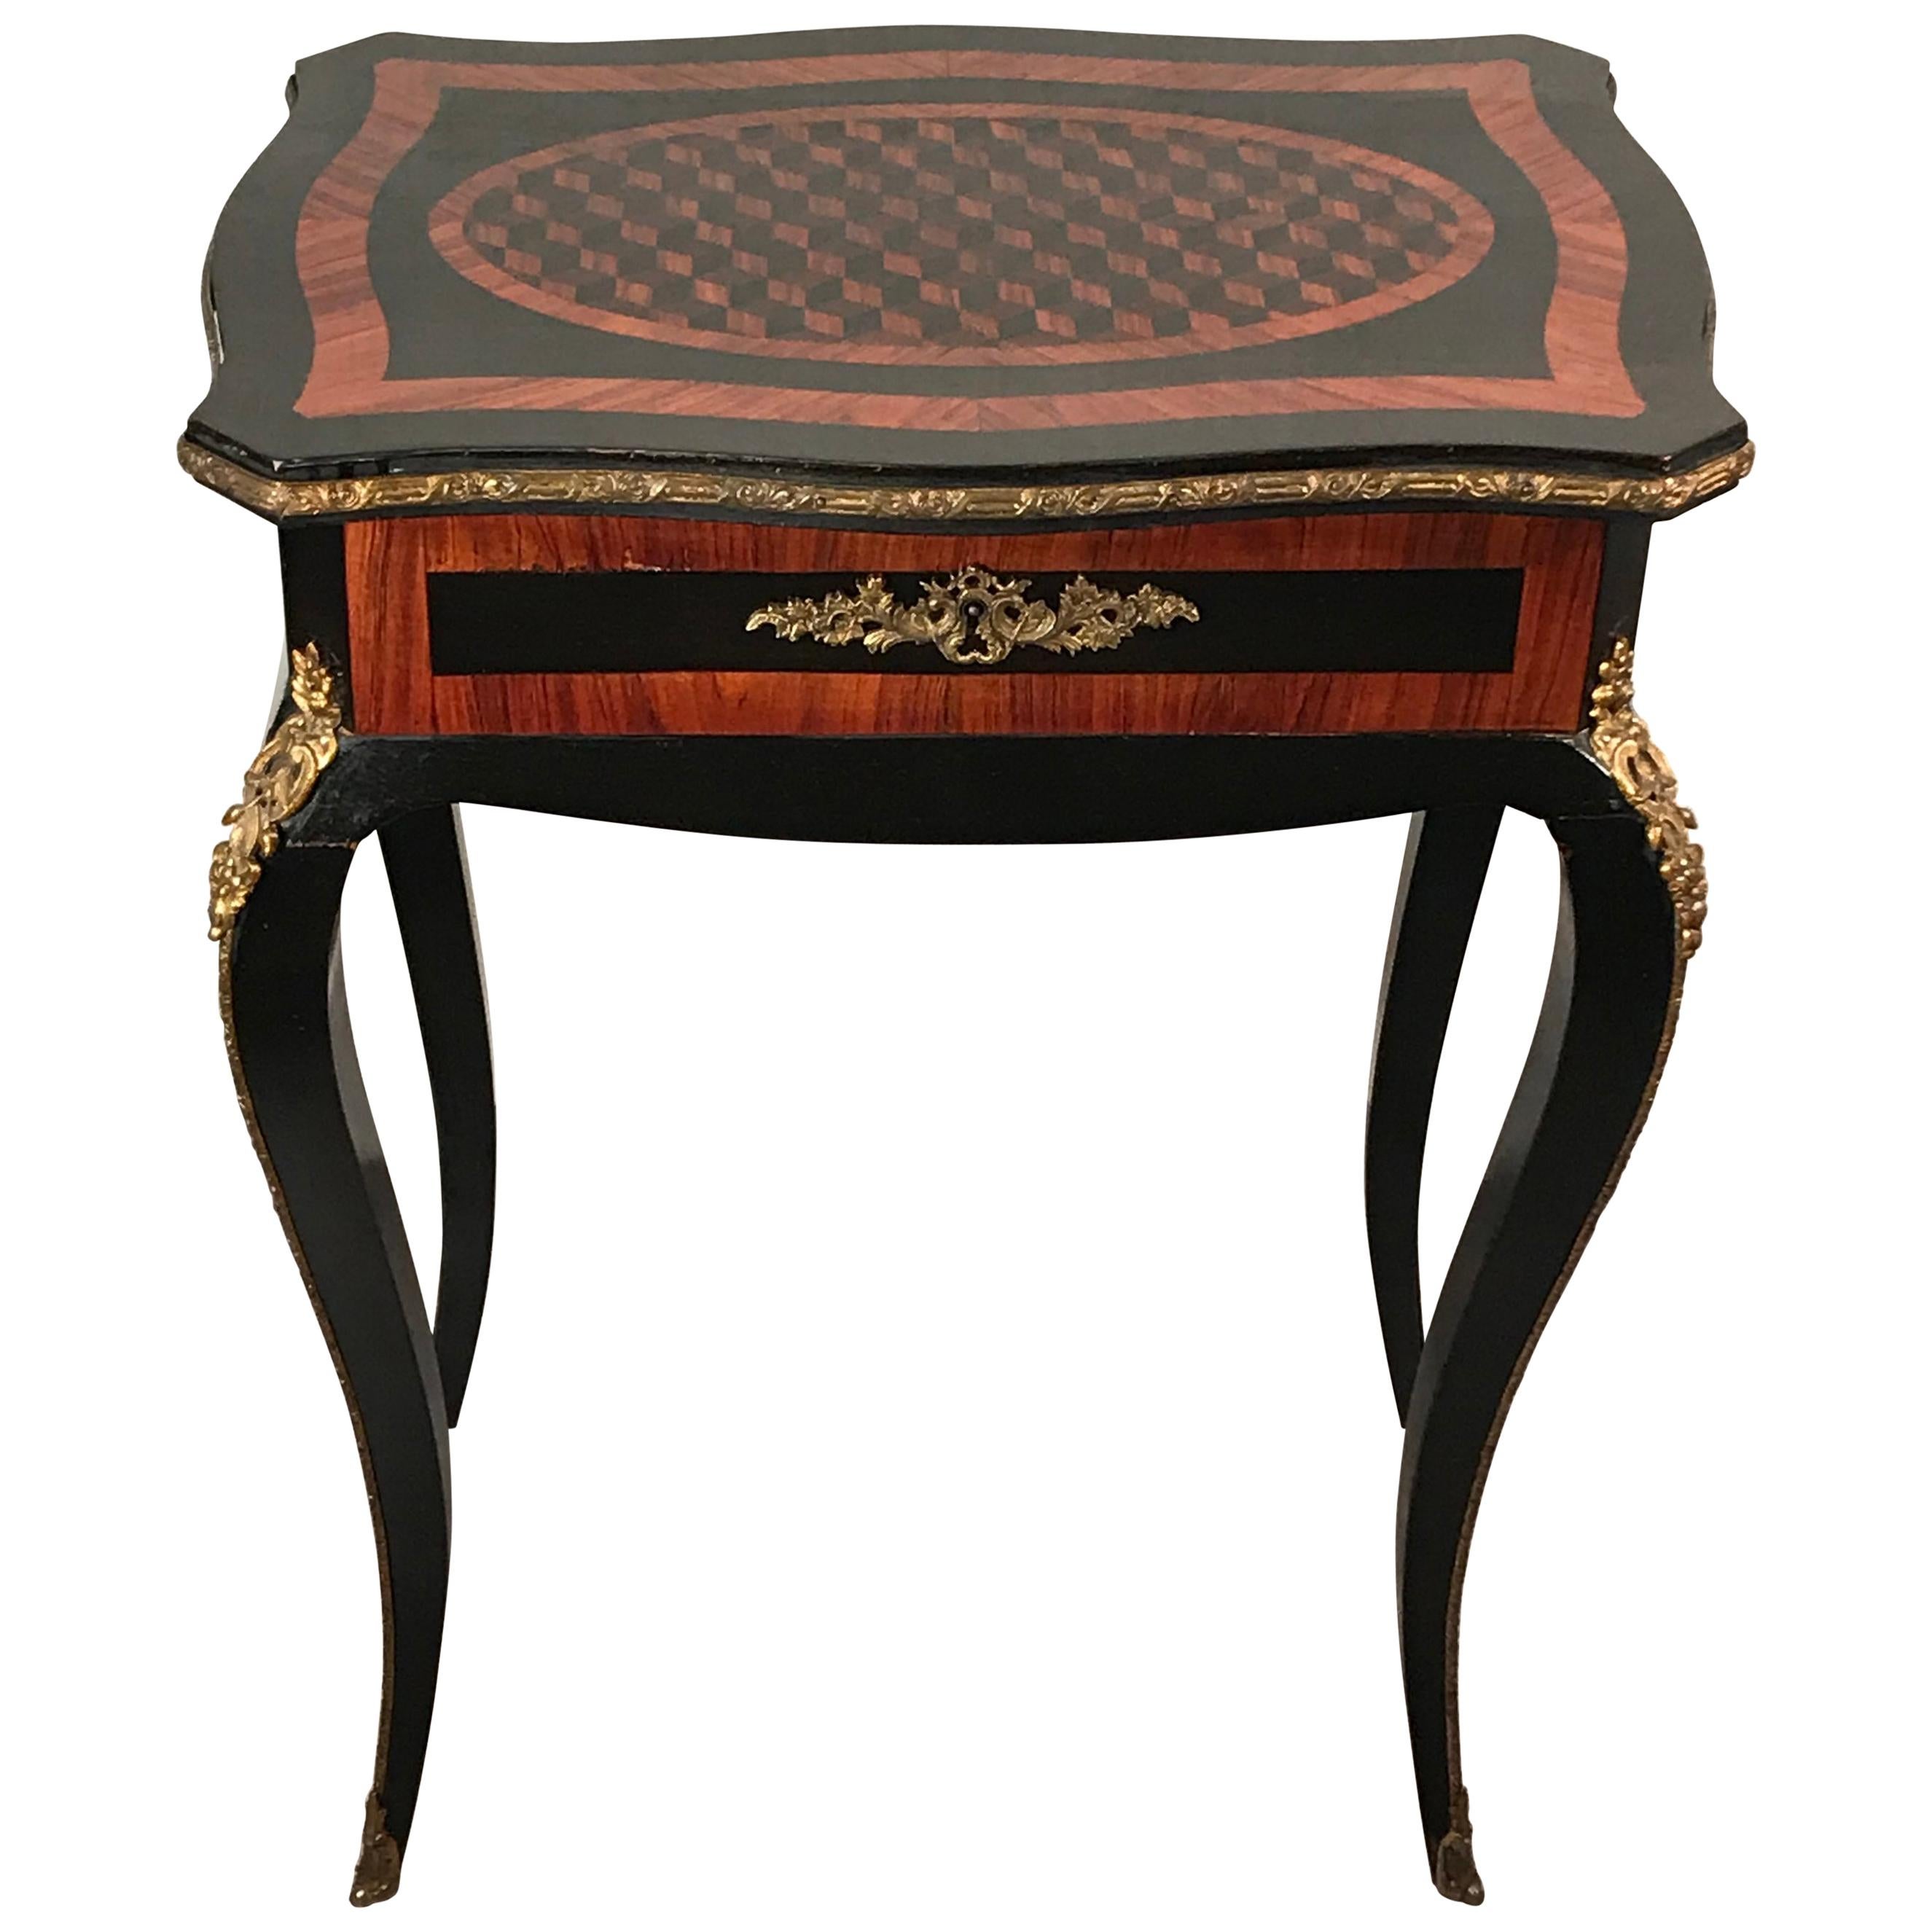 Table d'appoint Napoléon III, France, 1860-1870